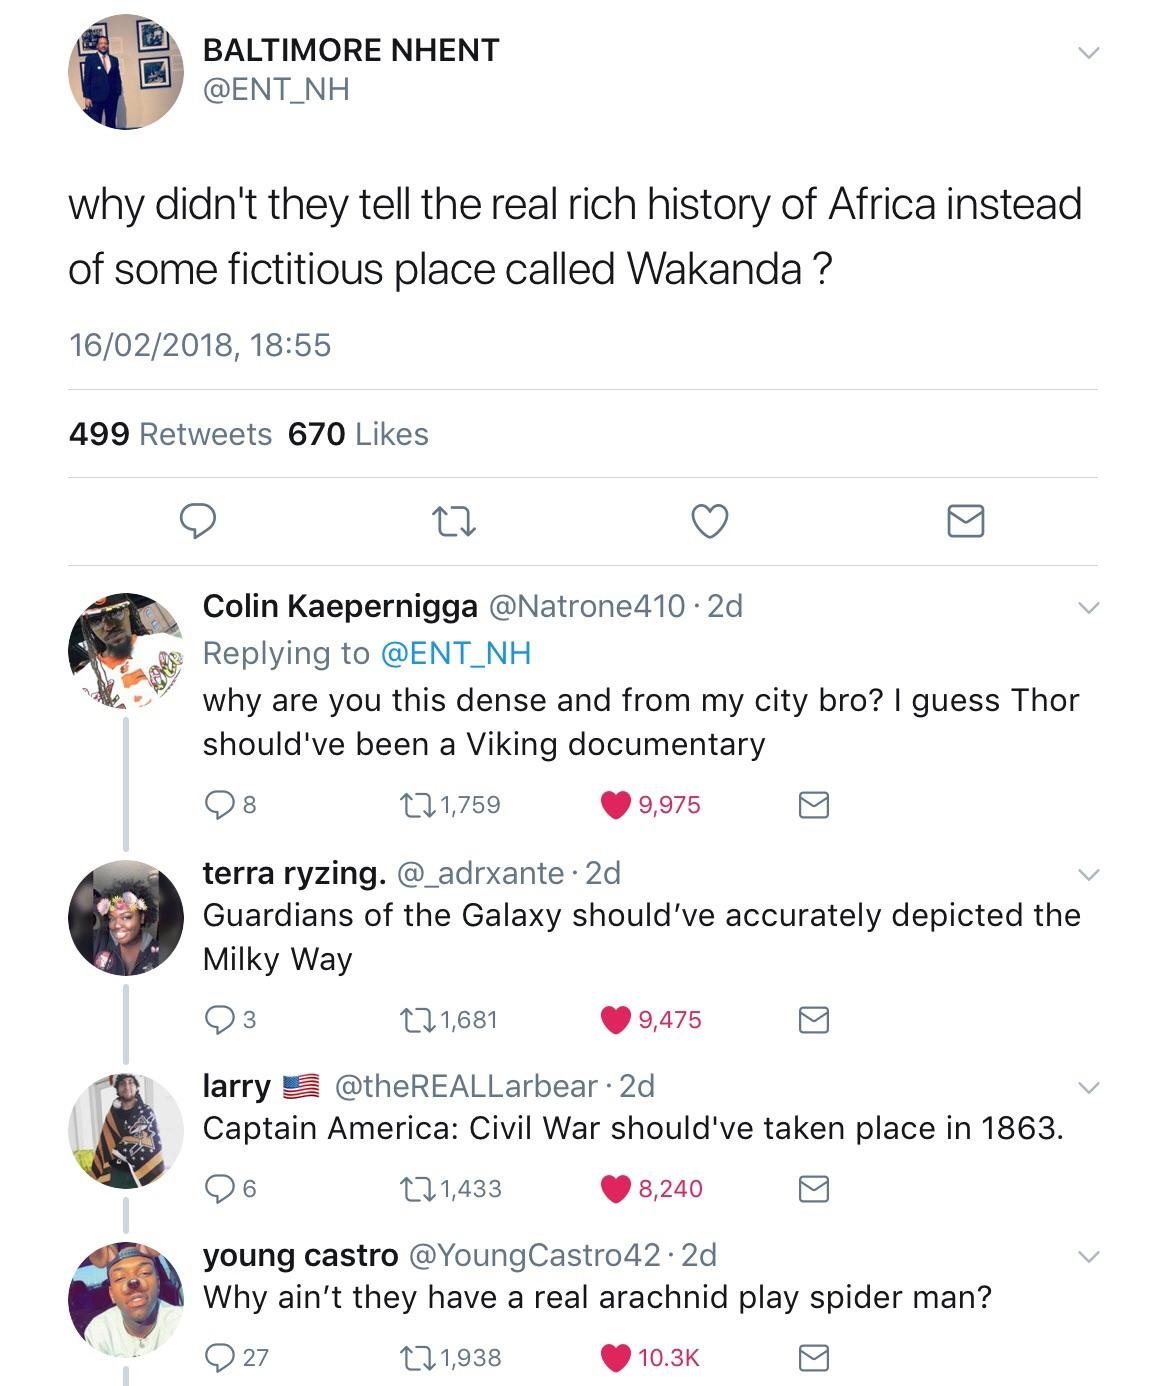 wakanda puns - Baltimore Nhent why didn't they tell the real rich history of Africa instead of some fictitious place called Wakanda ? 16022018, 499 670 08 Colin Kaepernigga why are you this dense and from my city bro? I guess Thor should've been a Viking 